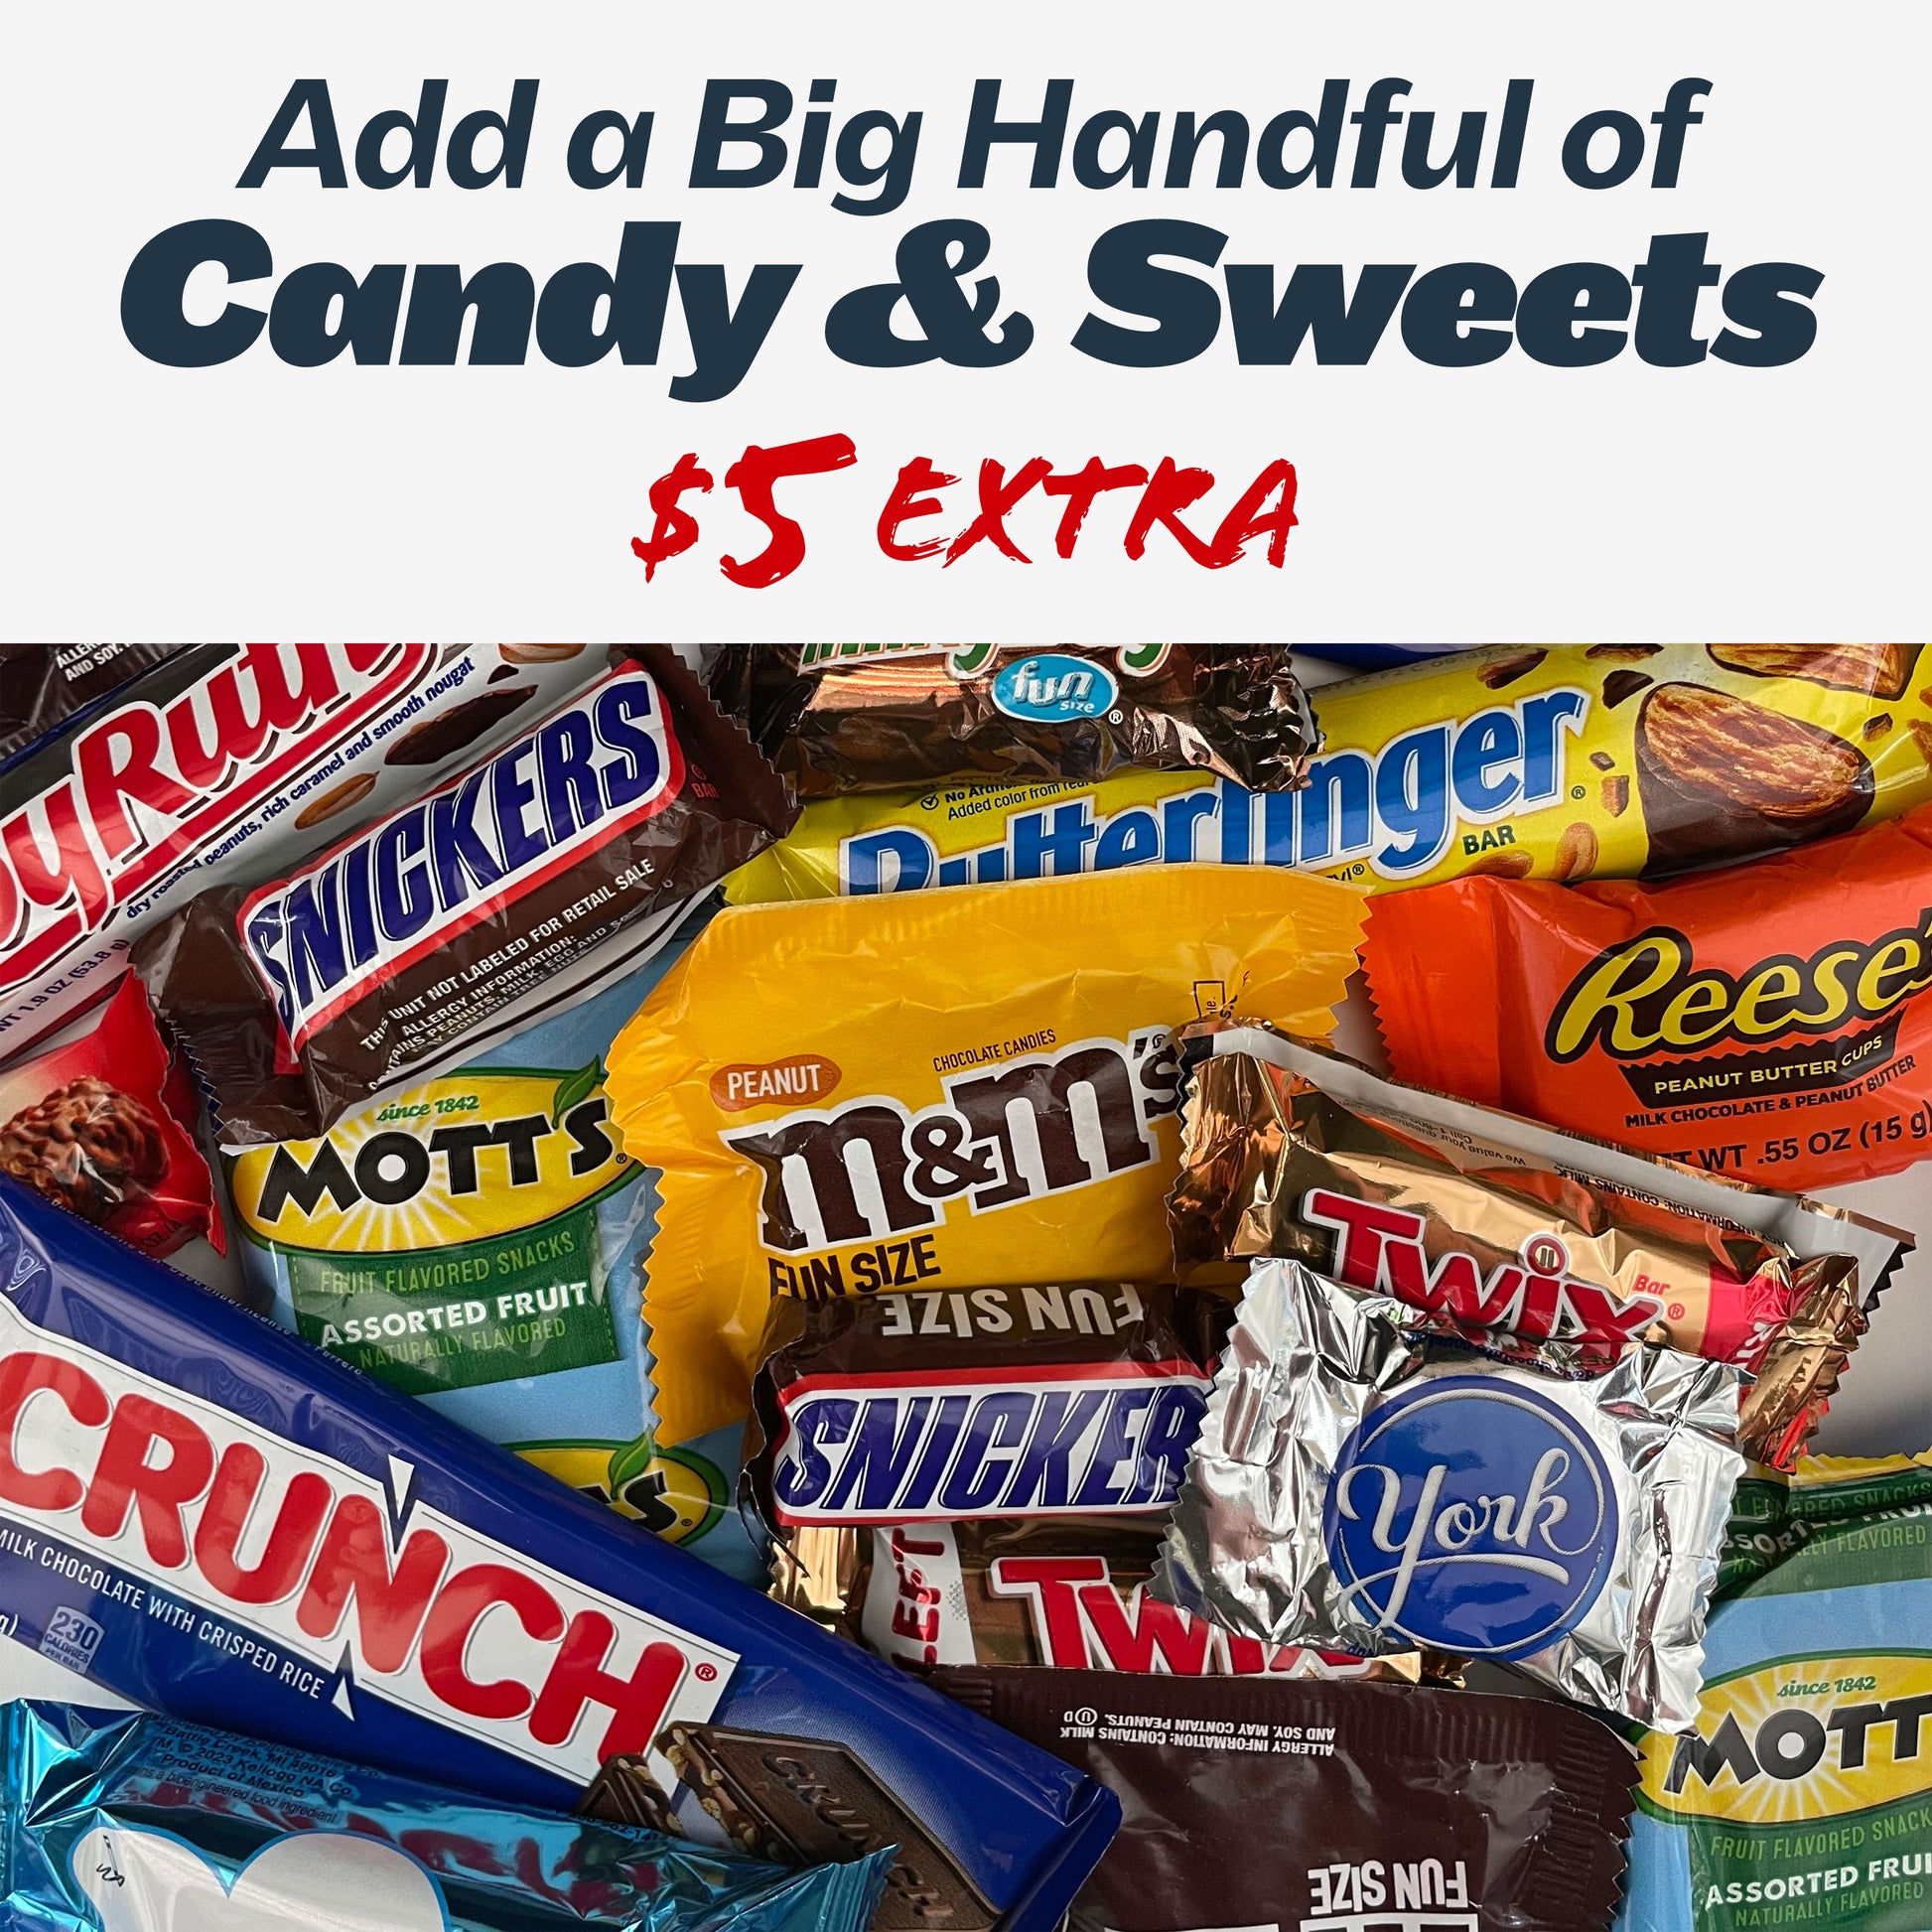 Add a big handfull of candy and sweets for only $5 extra! Candy add-on